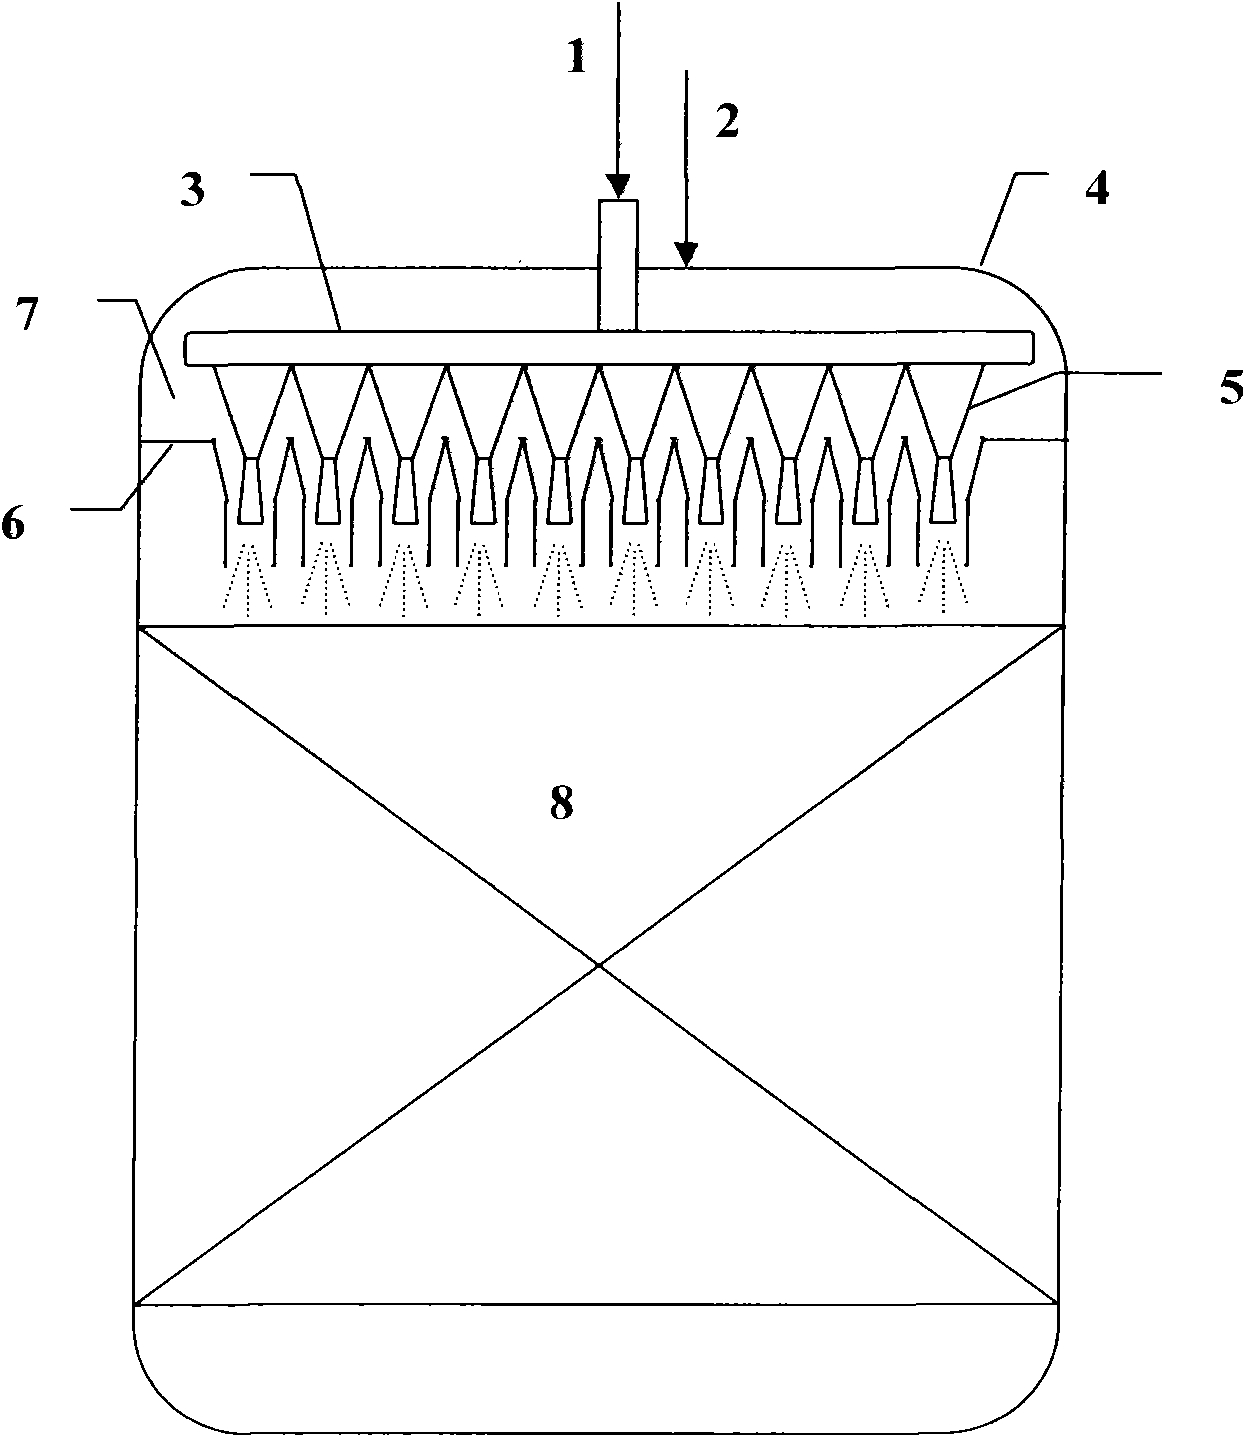 Low hydrogen-oil ratio hydrotreating method and reactor